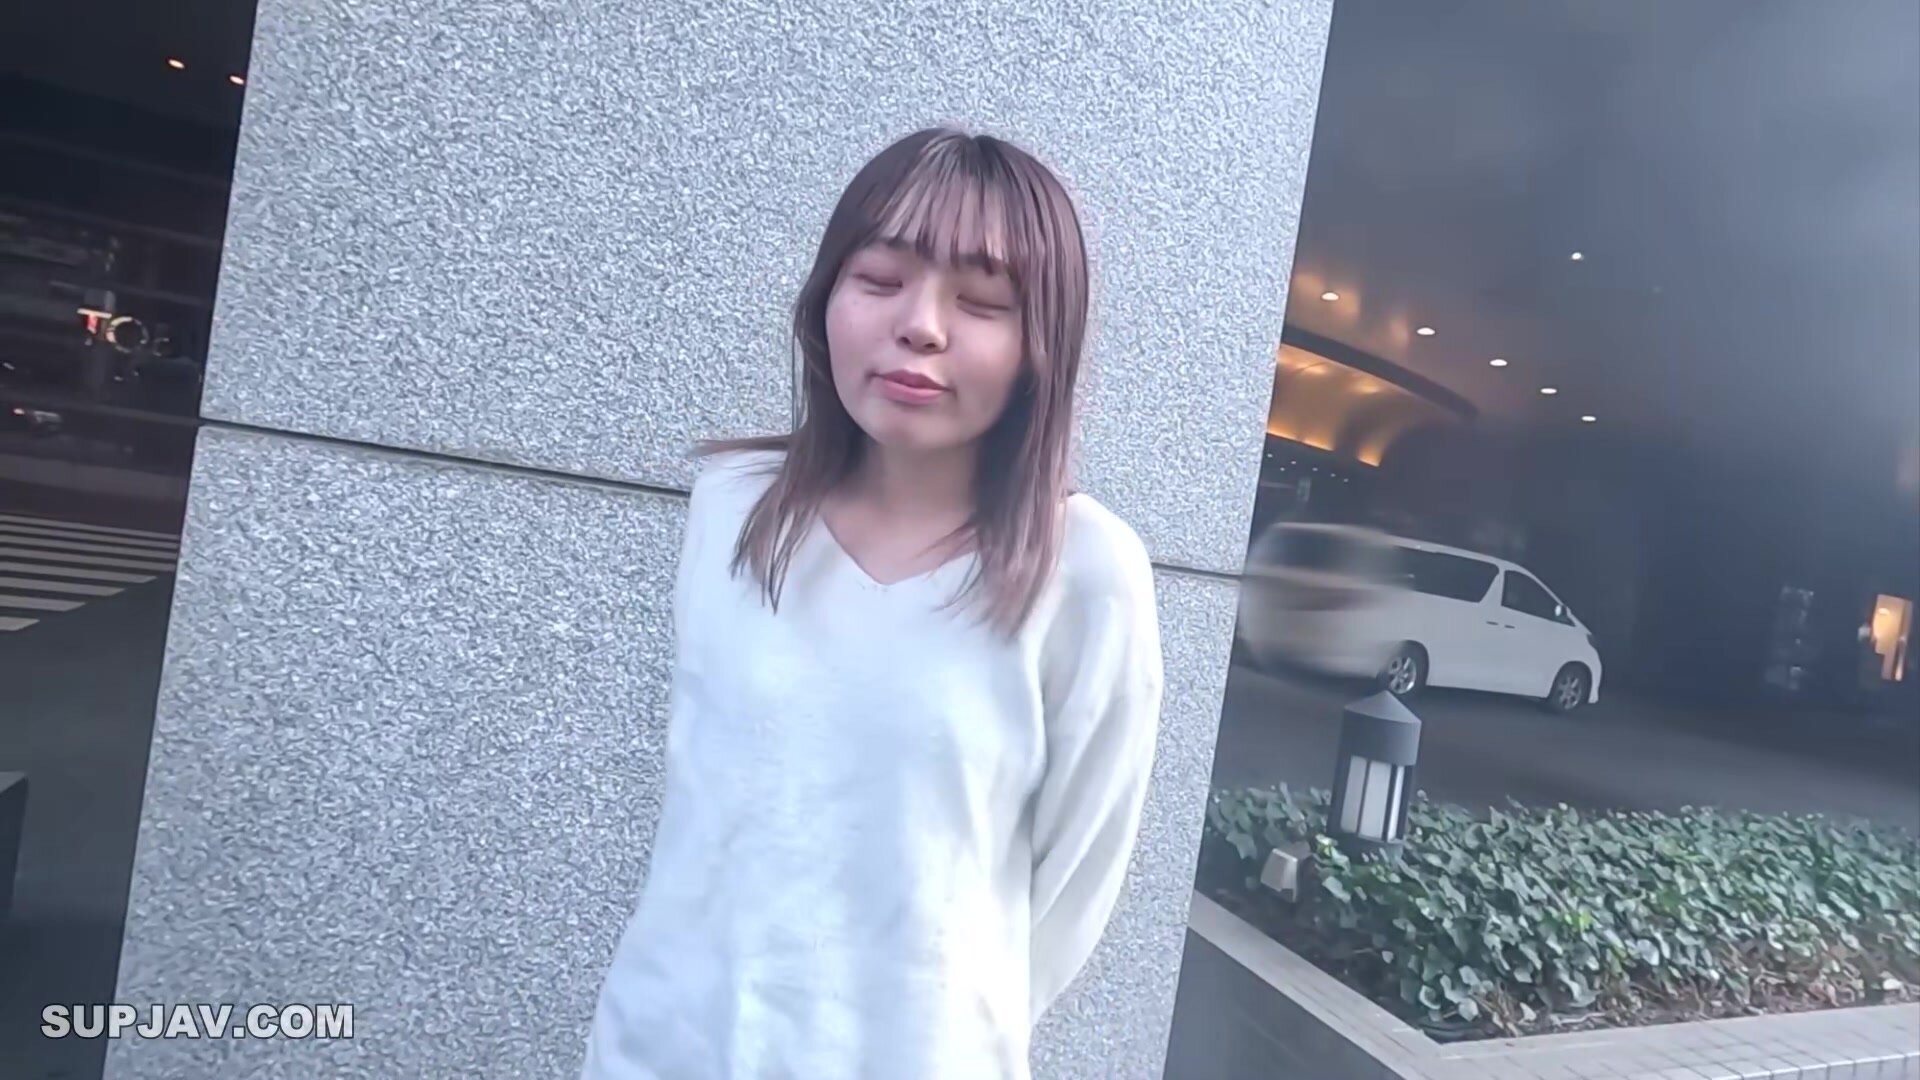 First shooting record. The partner procures locally. “Would you like to have sex with me? ” This century’s biggest big clit country girl is picked up on the street! 7 ejaculations of facial creampie and gokkun waves!